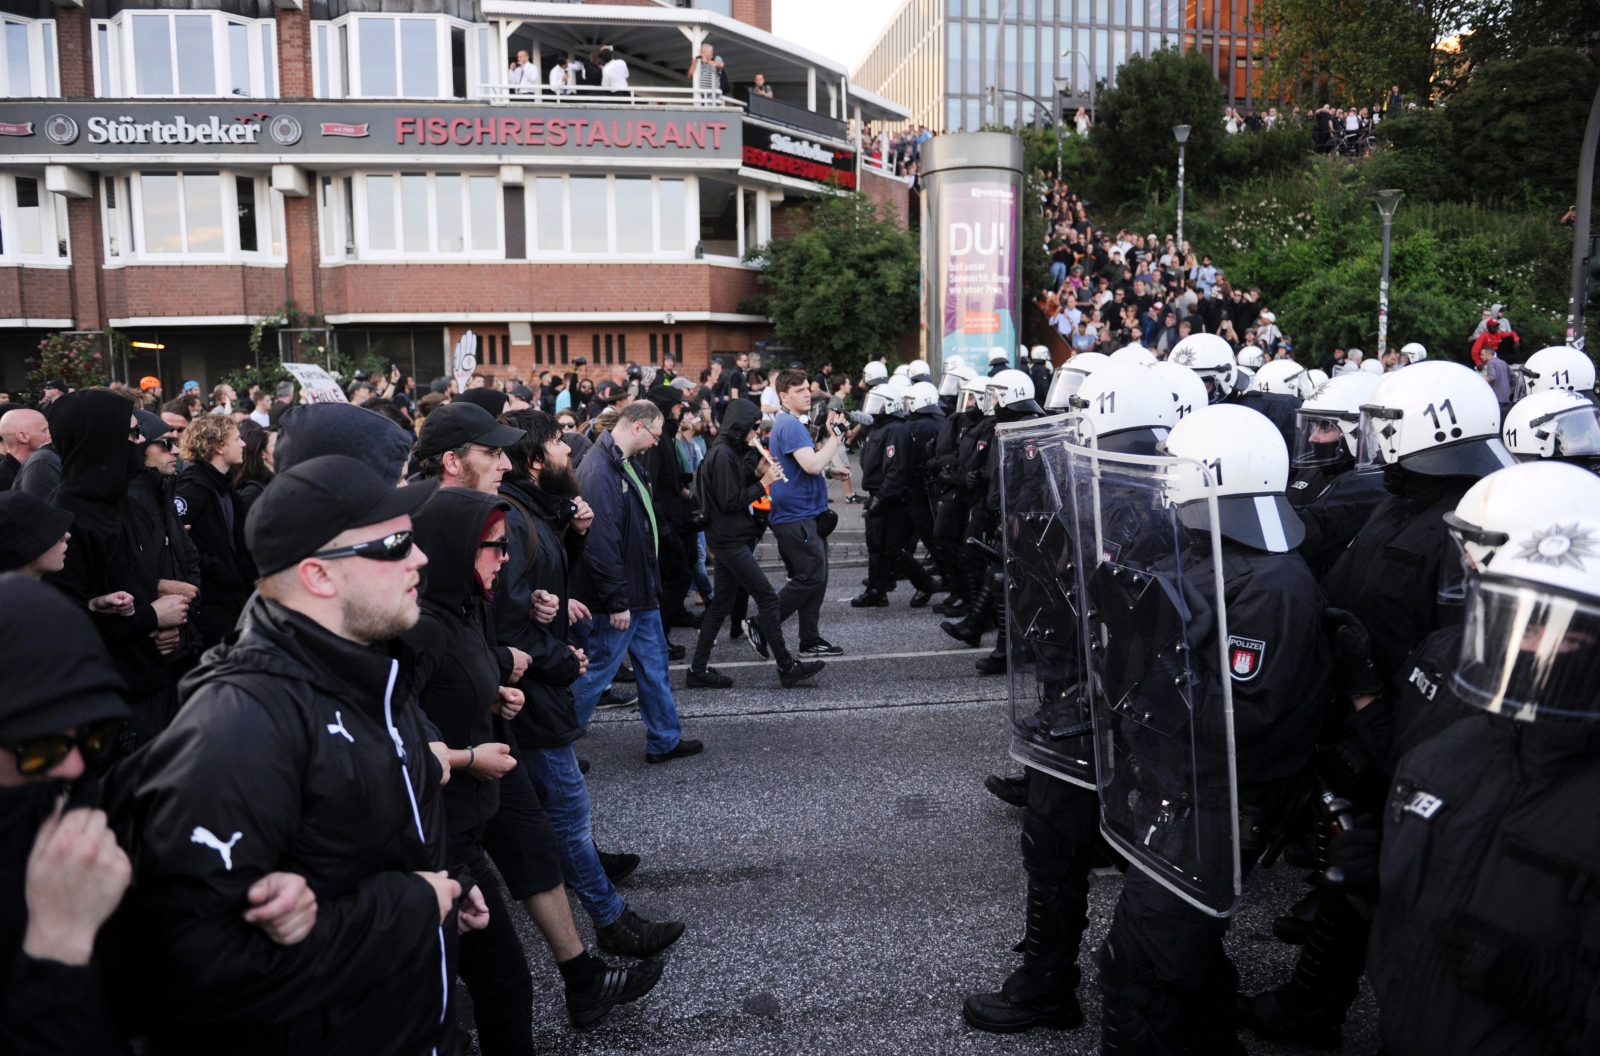 G20 protesters face Hamburg riot police